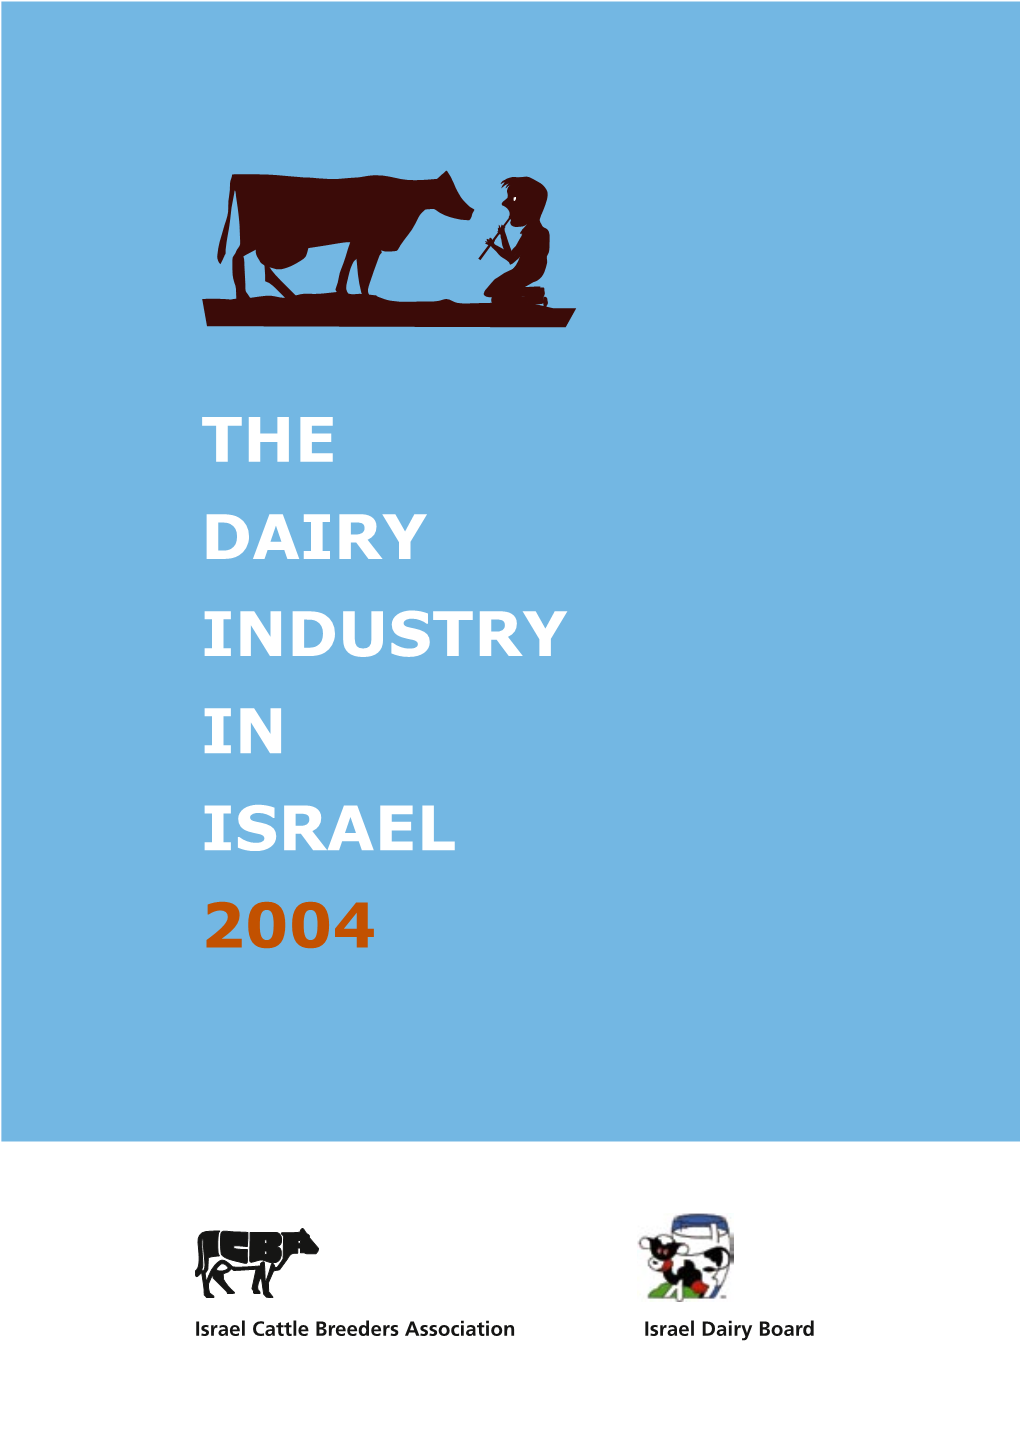 The Dairy Industry in Israel 2004